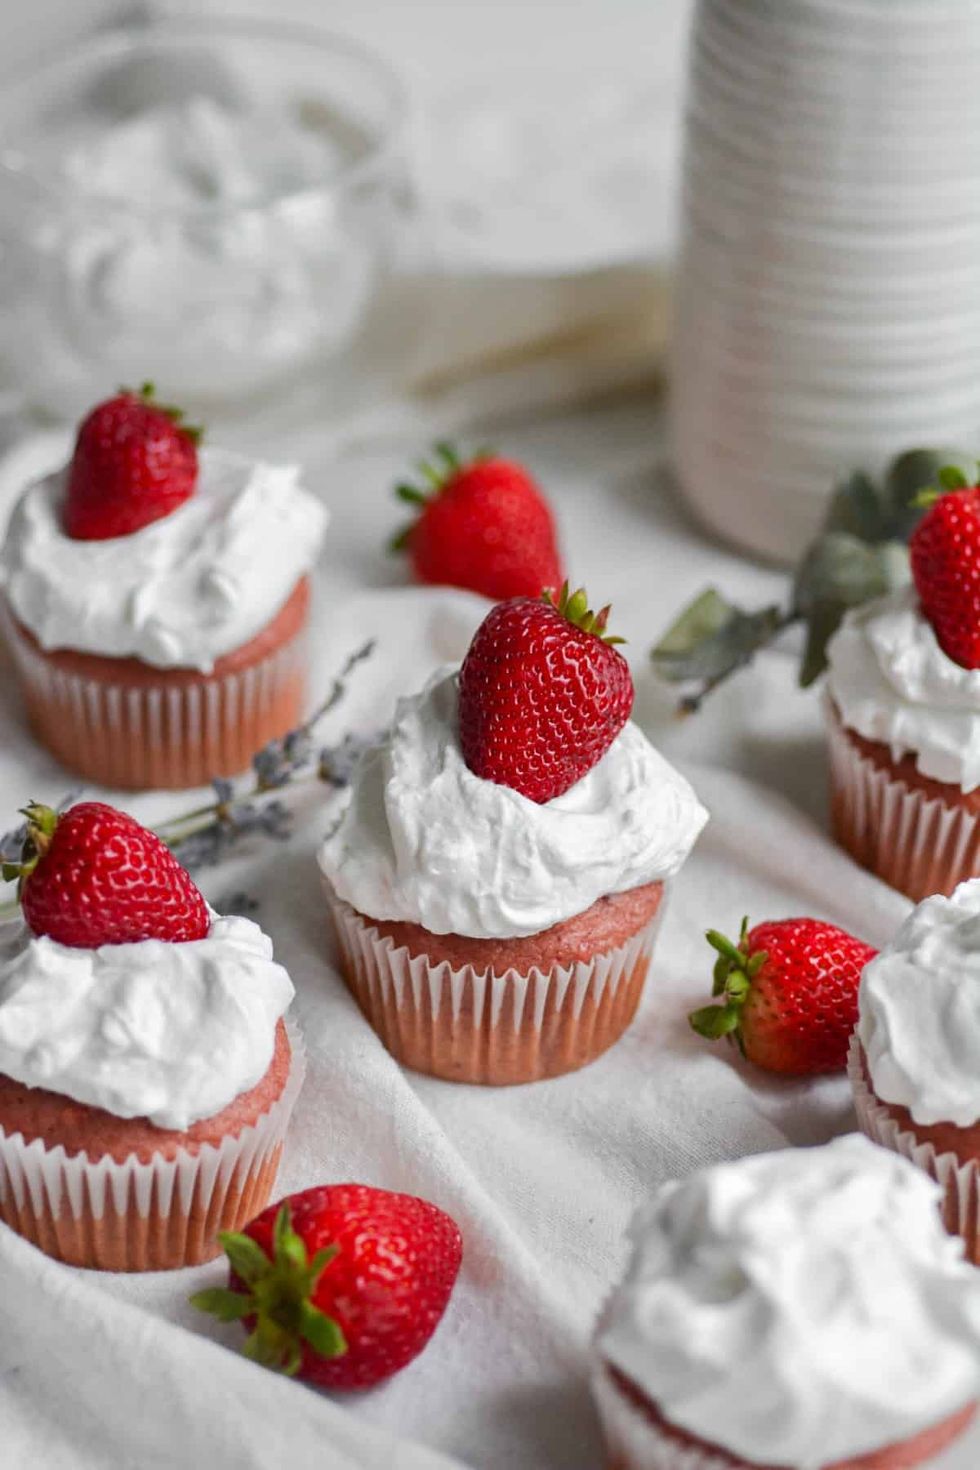 32 Irresistible Strawberry Desserts To Sweeten Up Summertime - Brit + Co